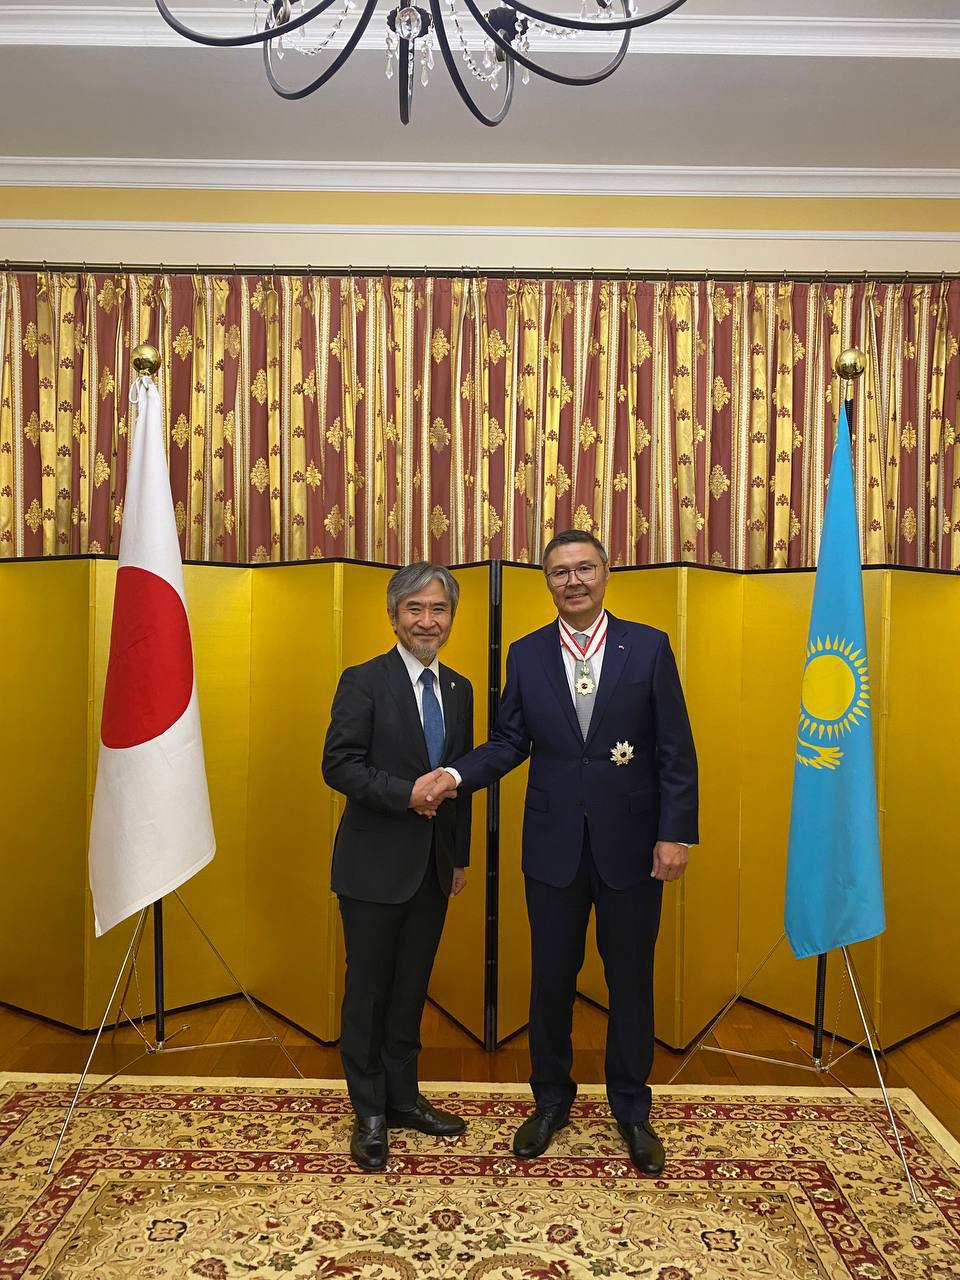 The Order of the Rising Sun was presented to the Ambassador of Kazakhstan on behalf of the Emperor of Japan